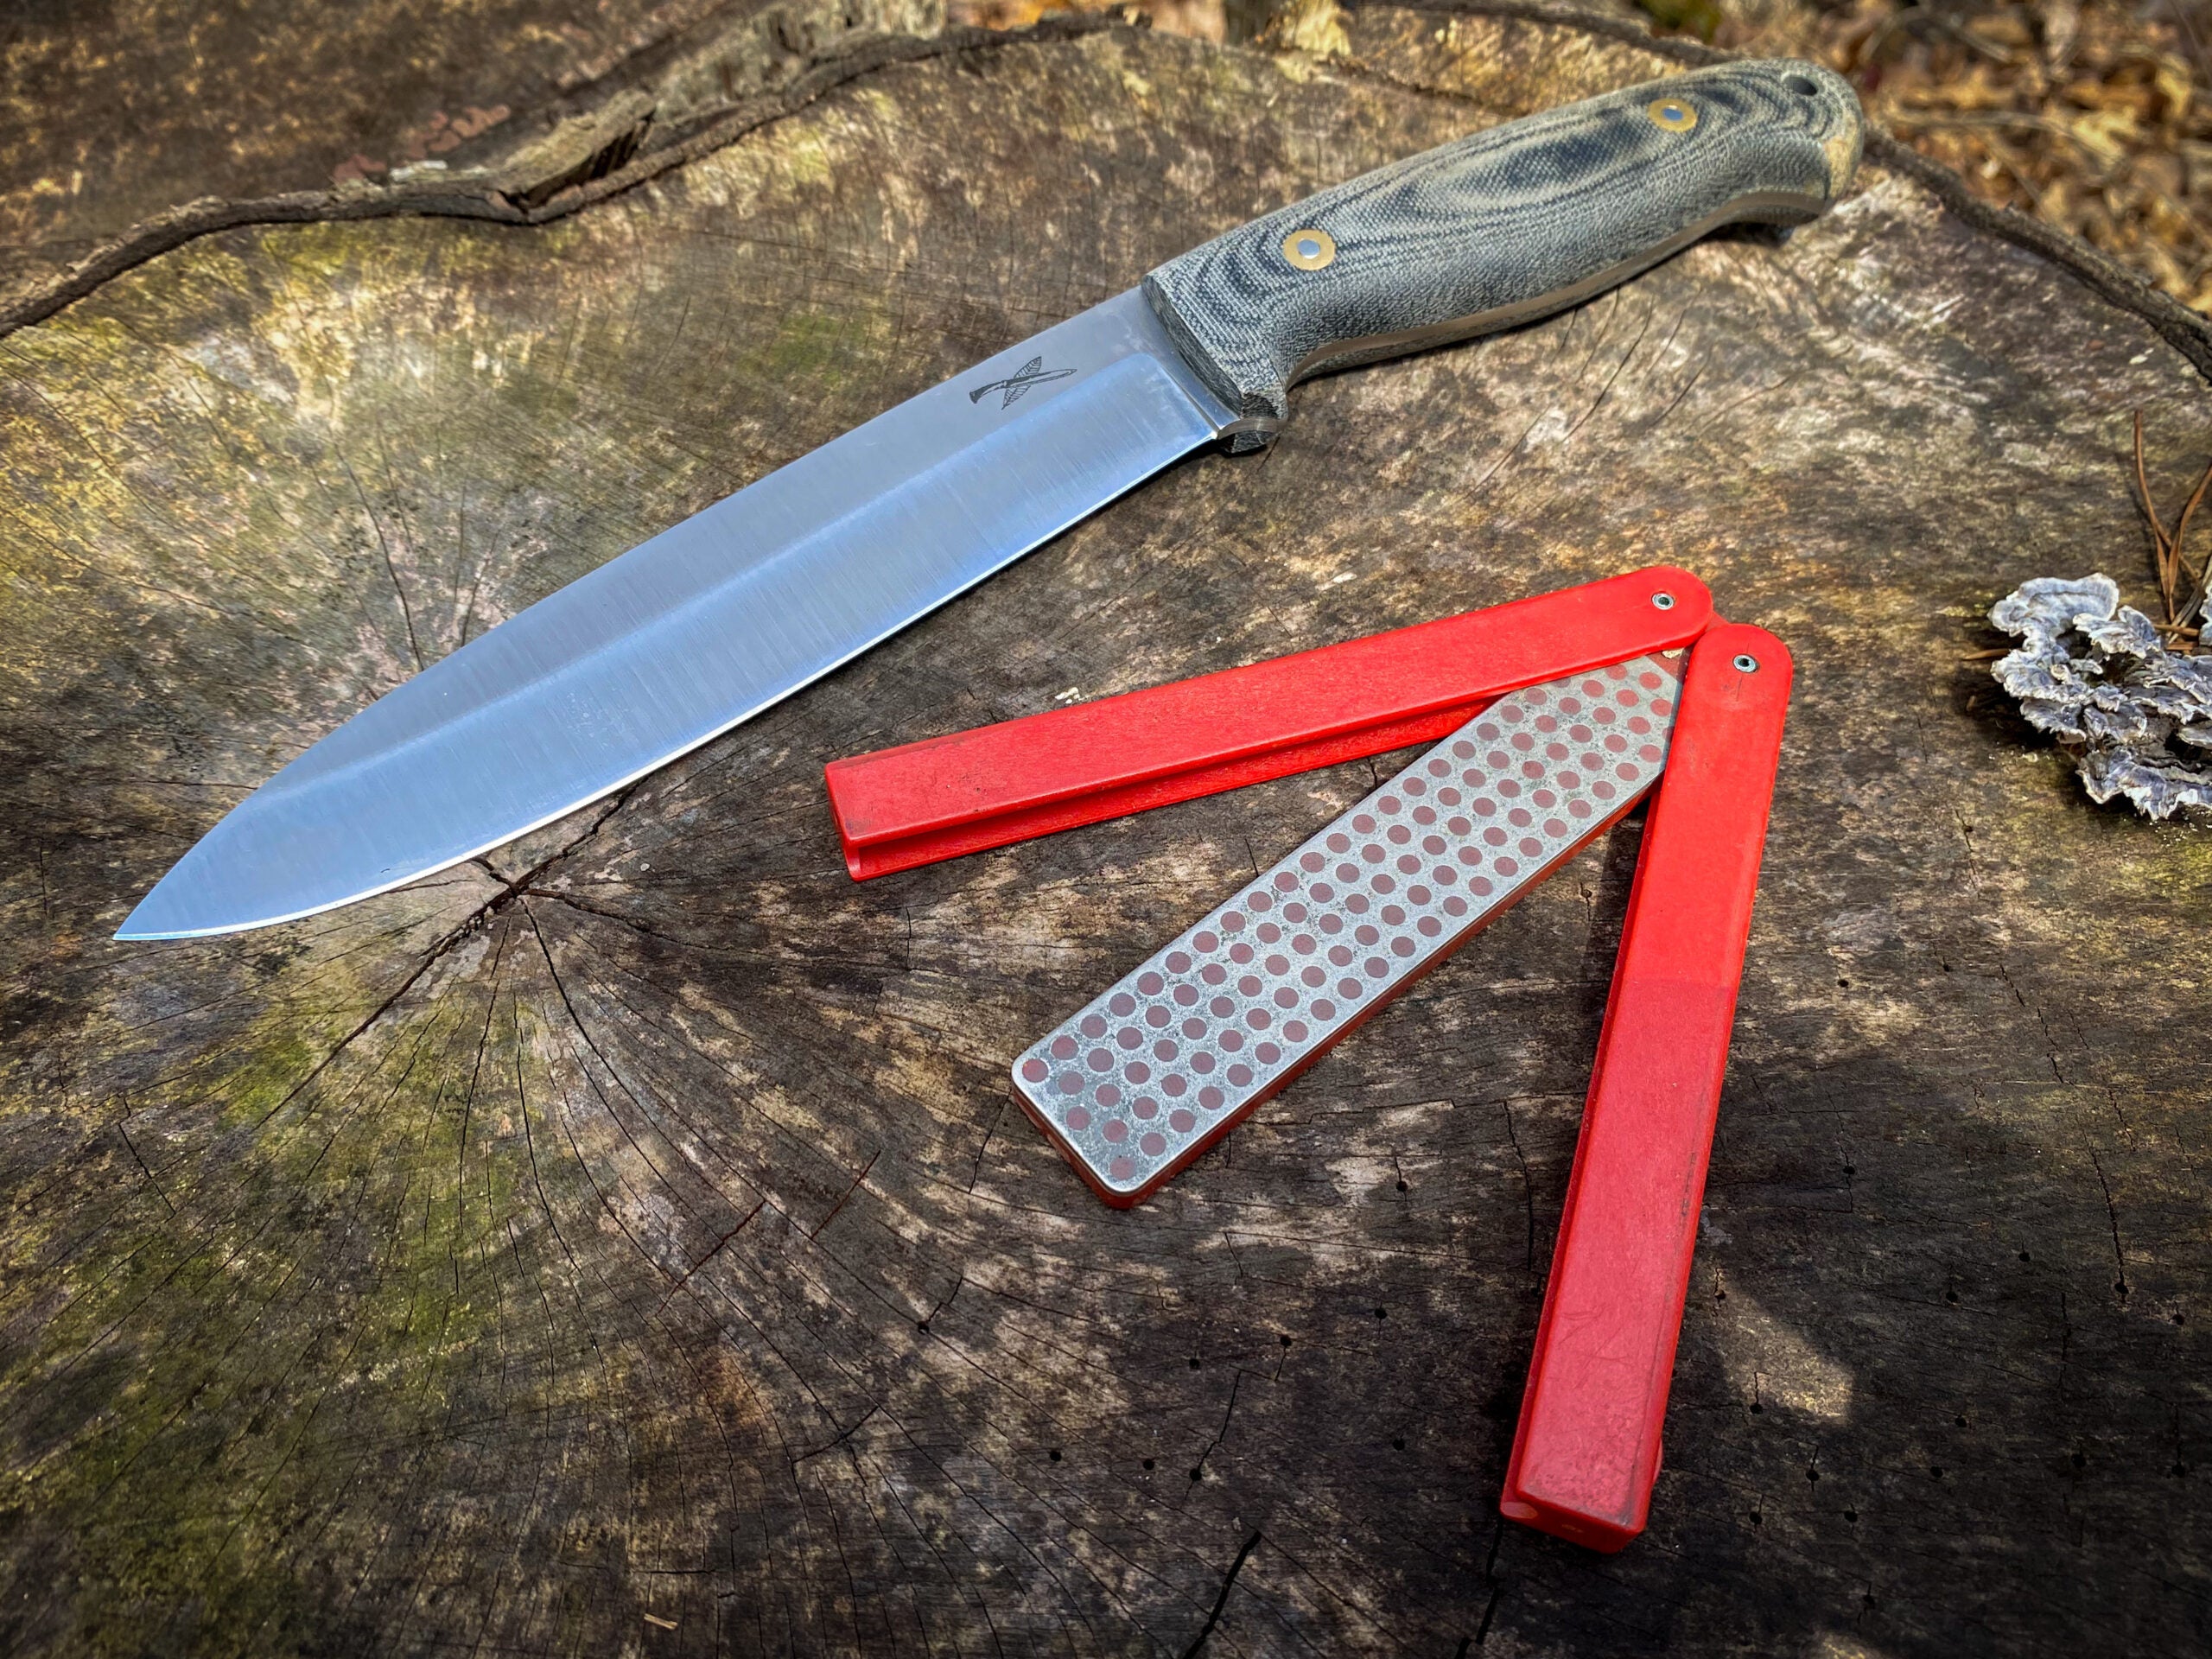 https://www.fieldandstream.com/uploads/2022/03/21/How-to-Sharpen-a-Knife-8-A-diamond-stone-has-an-integrated-cover-to-keep-in-your-pack-or-pocket-scaled.jpg?auto=webp